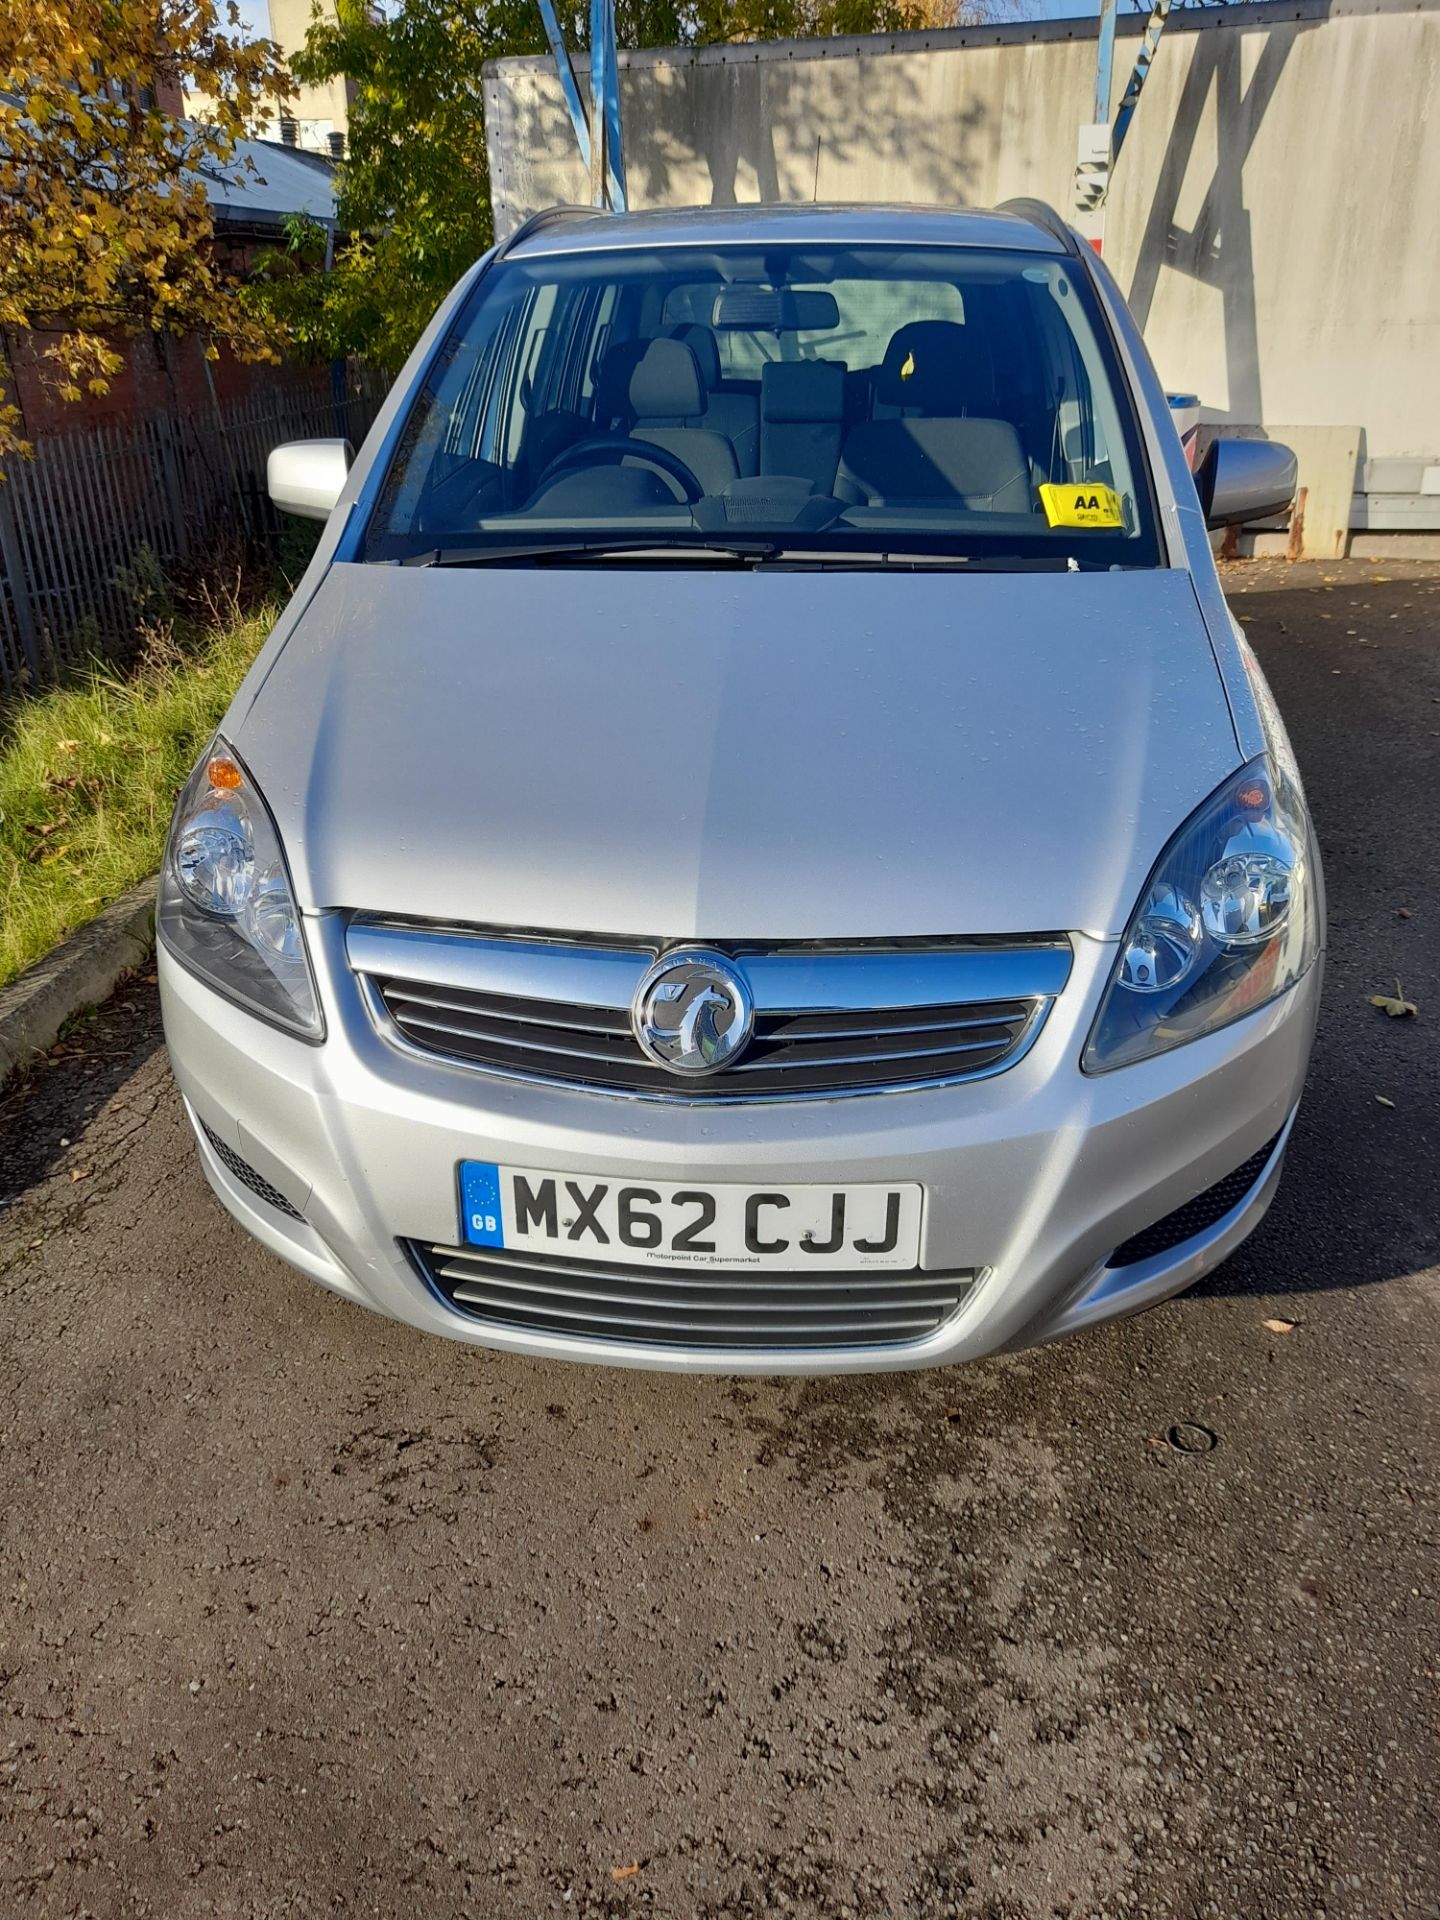 Vauxhall Zafira 7-Seater Car, First Registered 01/ - Image 2 of 14